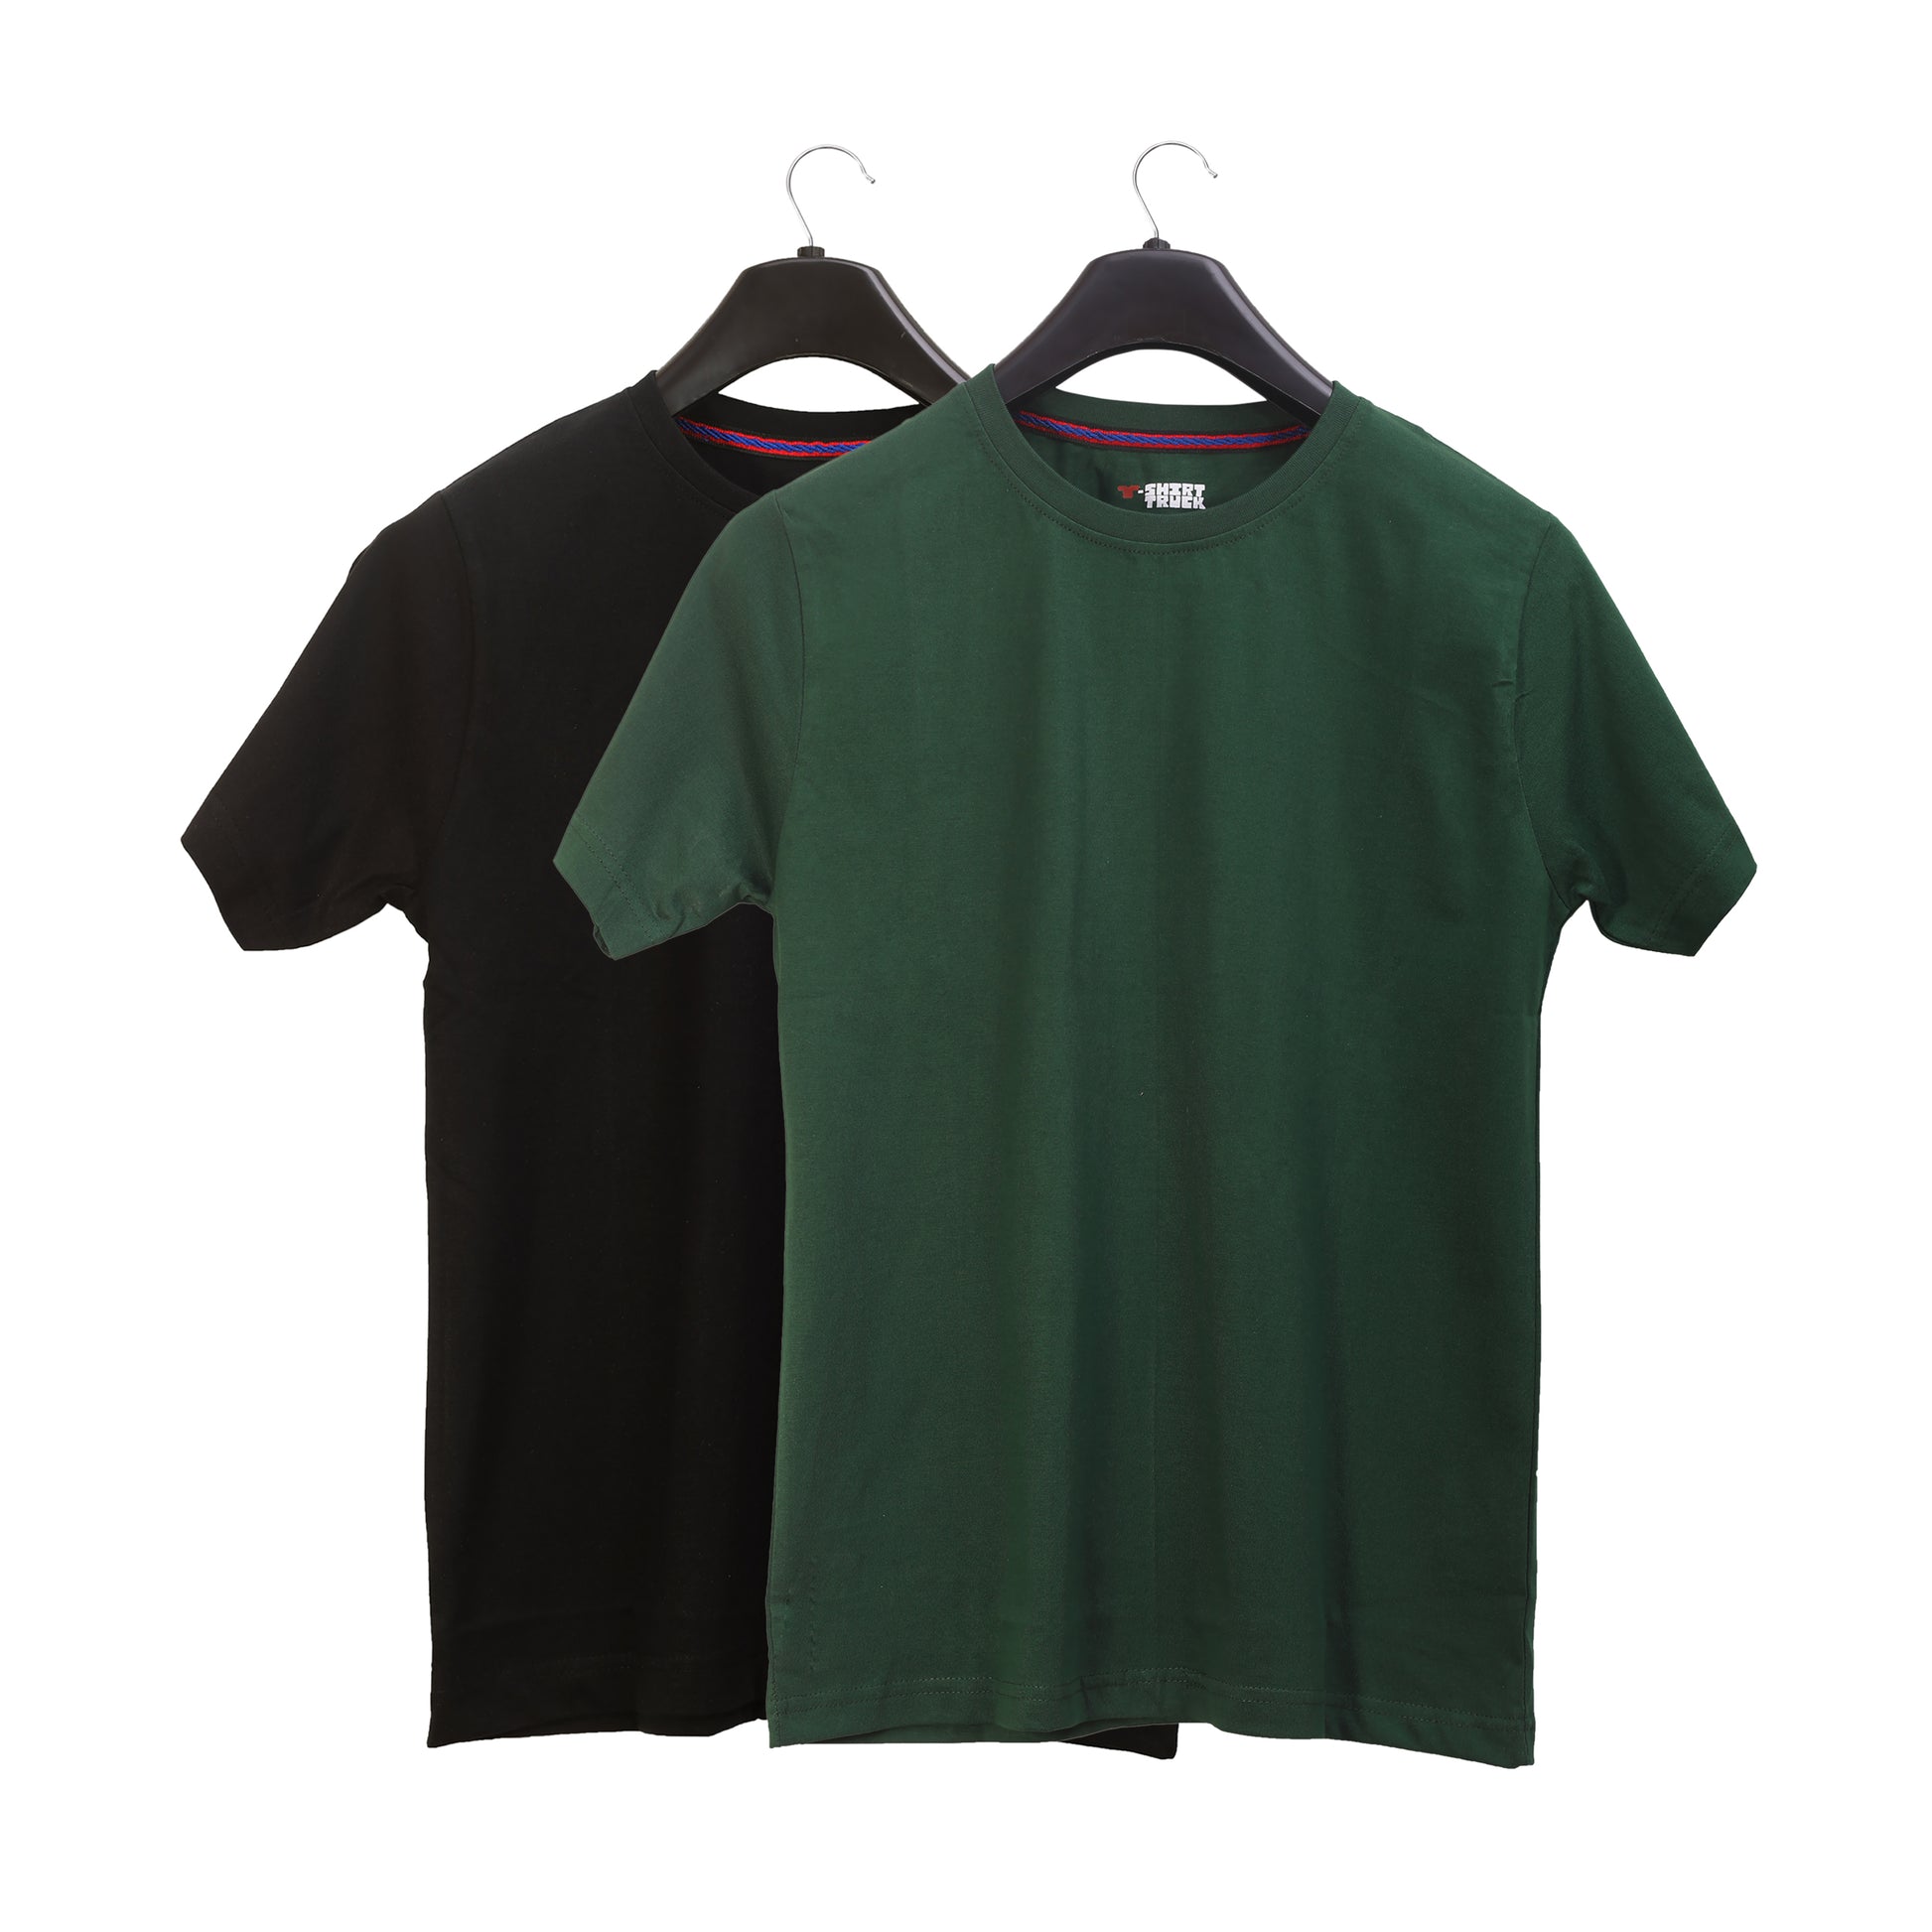 Unisex Round Neck Plain Solid Combo Pack of 2 T-shirts Black & Green